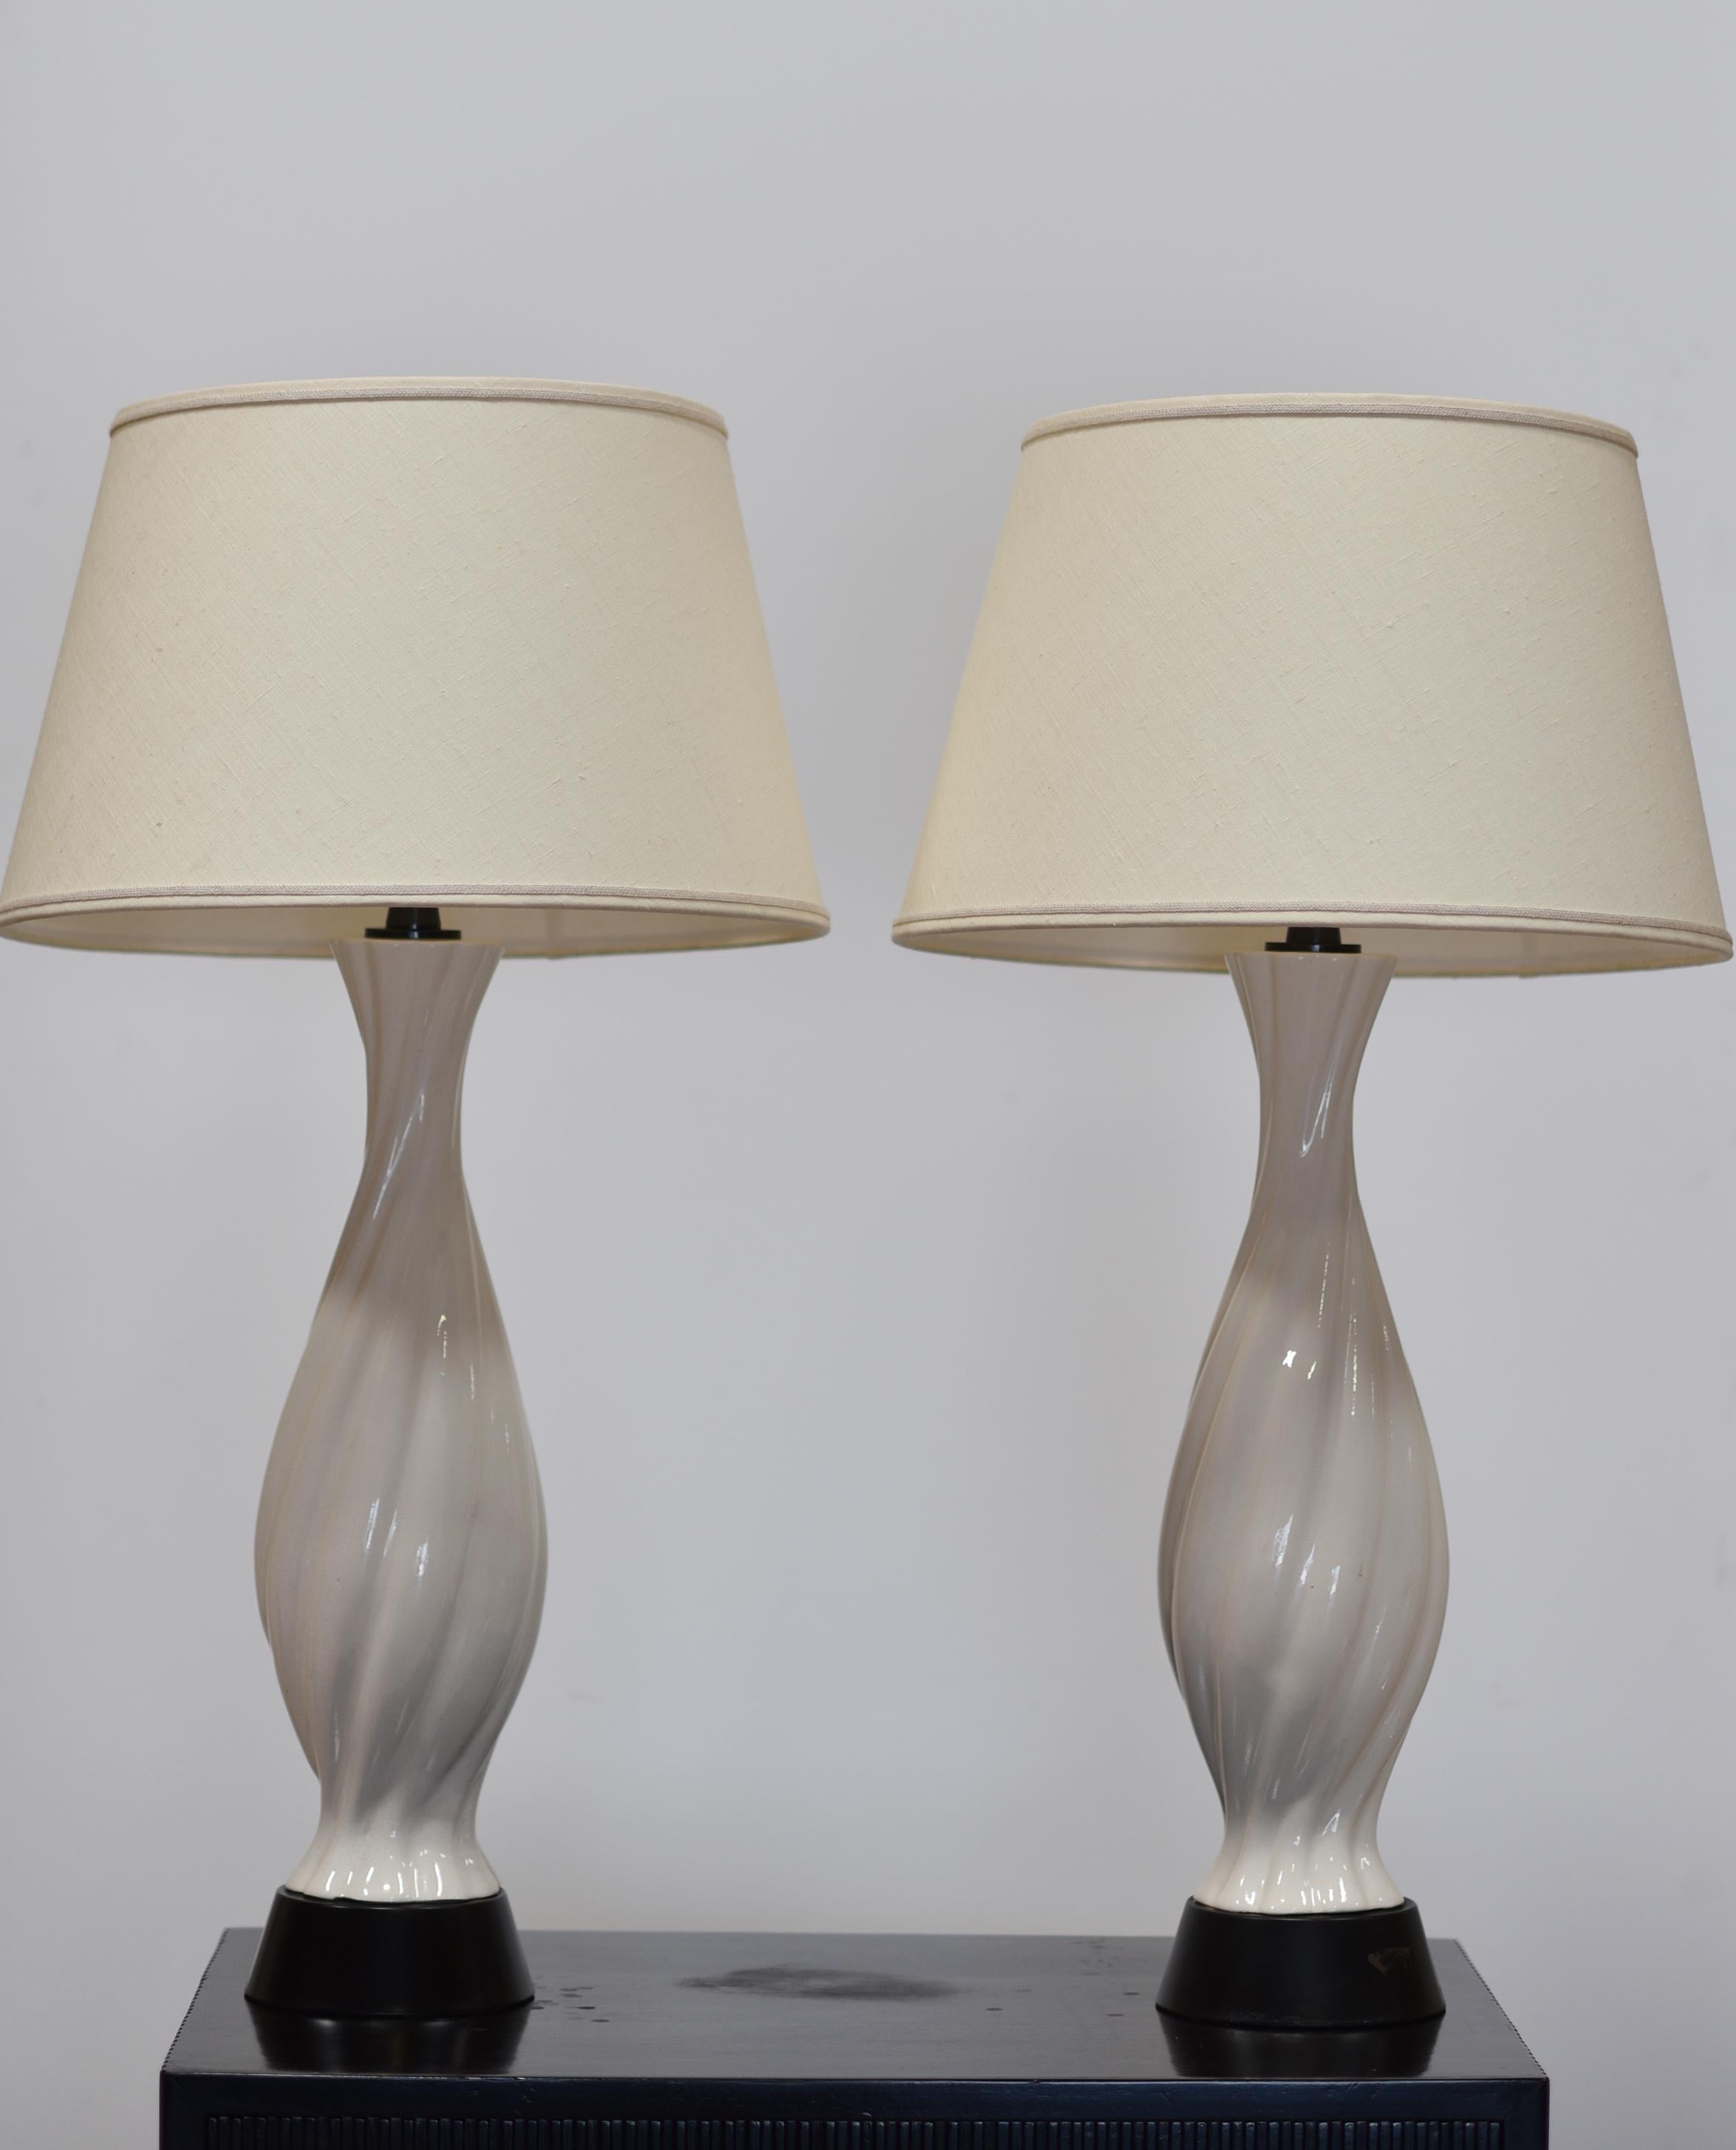 Italian Pair of White Porcelain Baluster Form Table Lamps For Sale